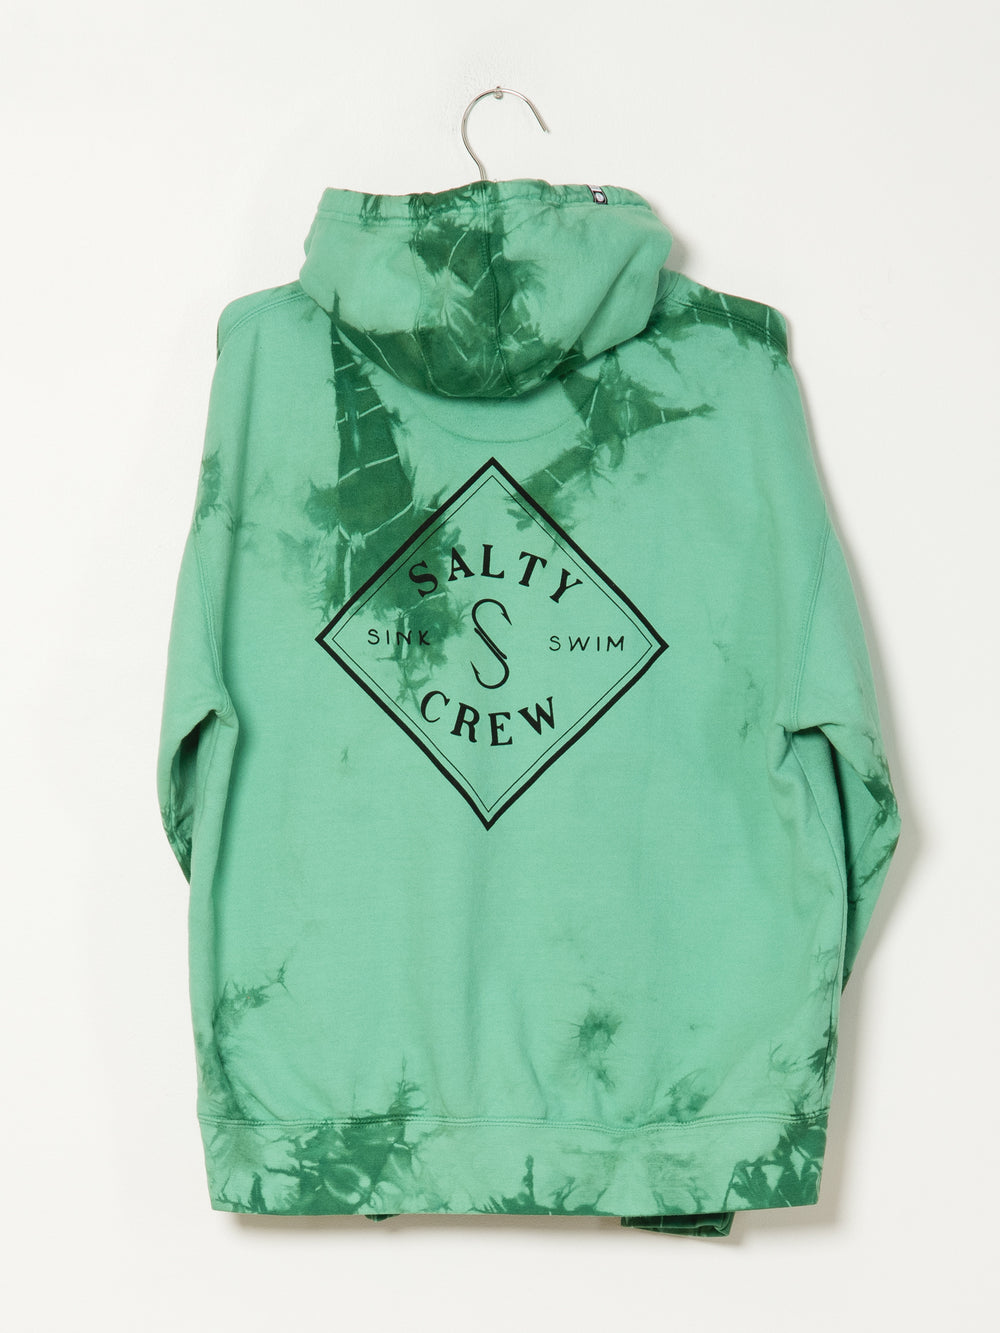 SALTY CREW TIPPET TIE DYE PULL OVER HOODIE - CLEARANCE